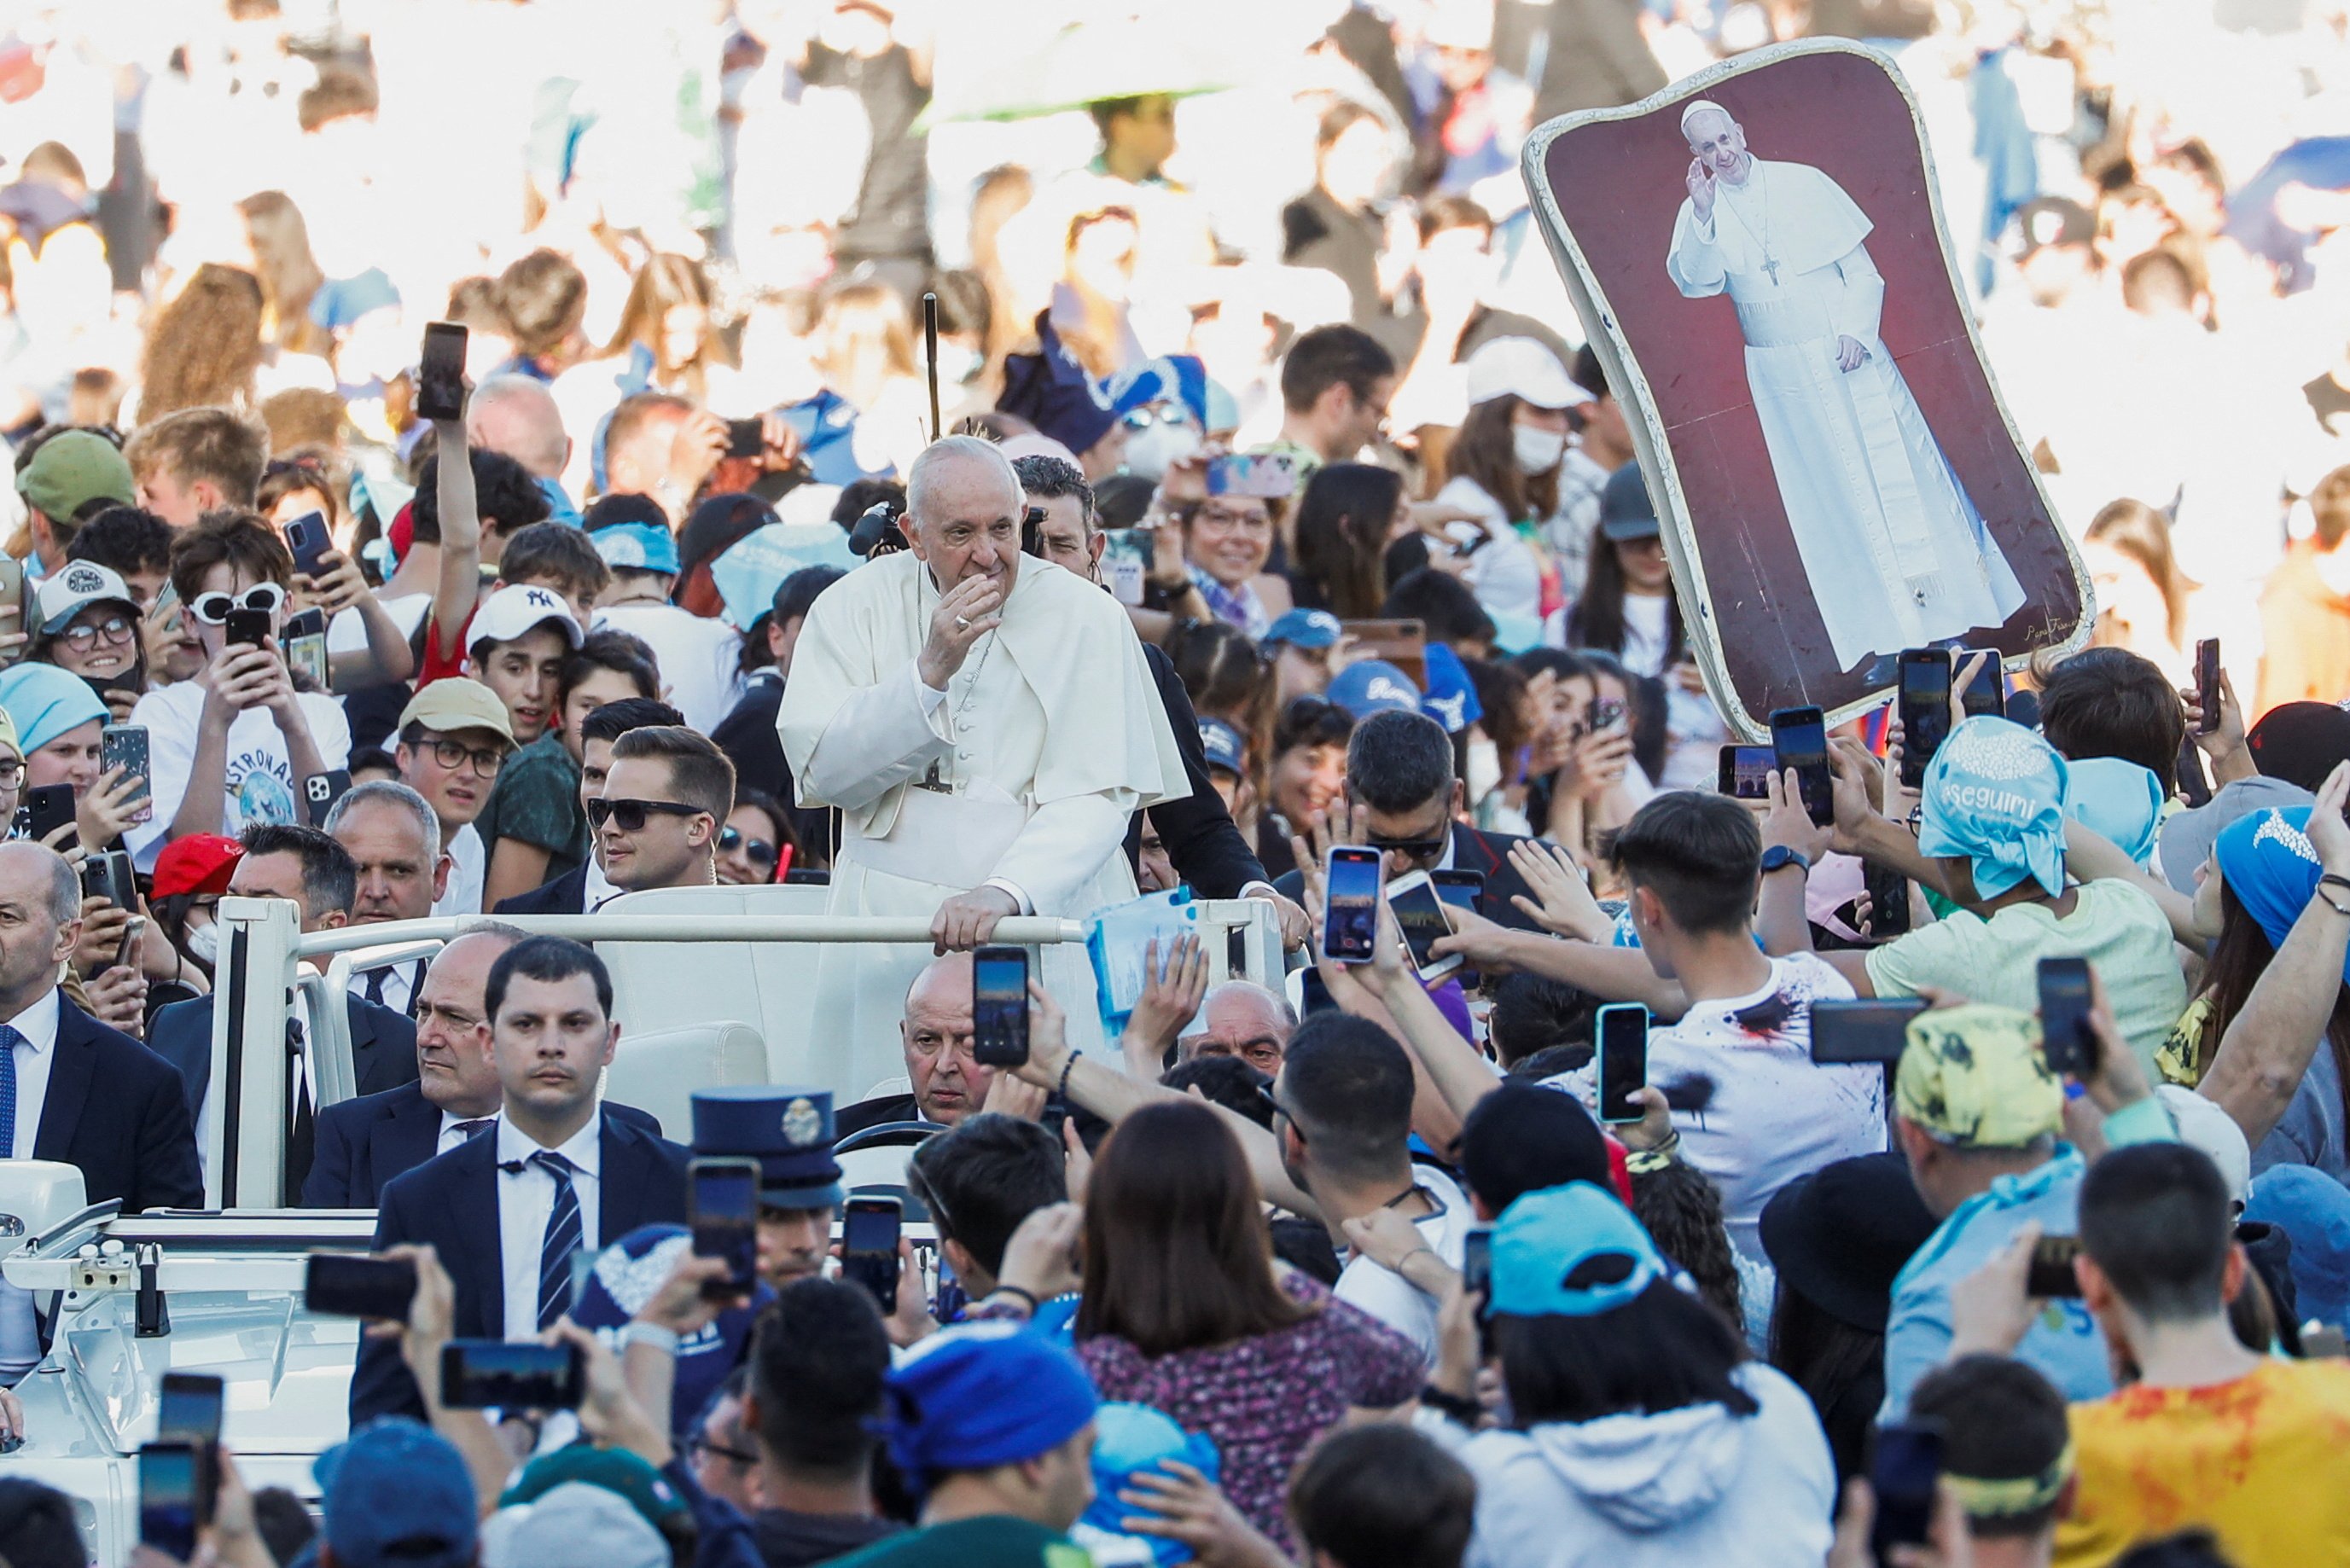 Pope Francis waves as he arrives for a meeting with thousands of young people taking part in a pilgrimage organized by the Italian bishops' conference in St. Peter's Square at the Vatican April 18, 2022. (CNS photo/Remo Casilli, Reuters)